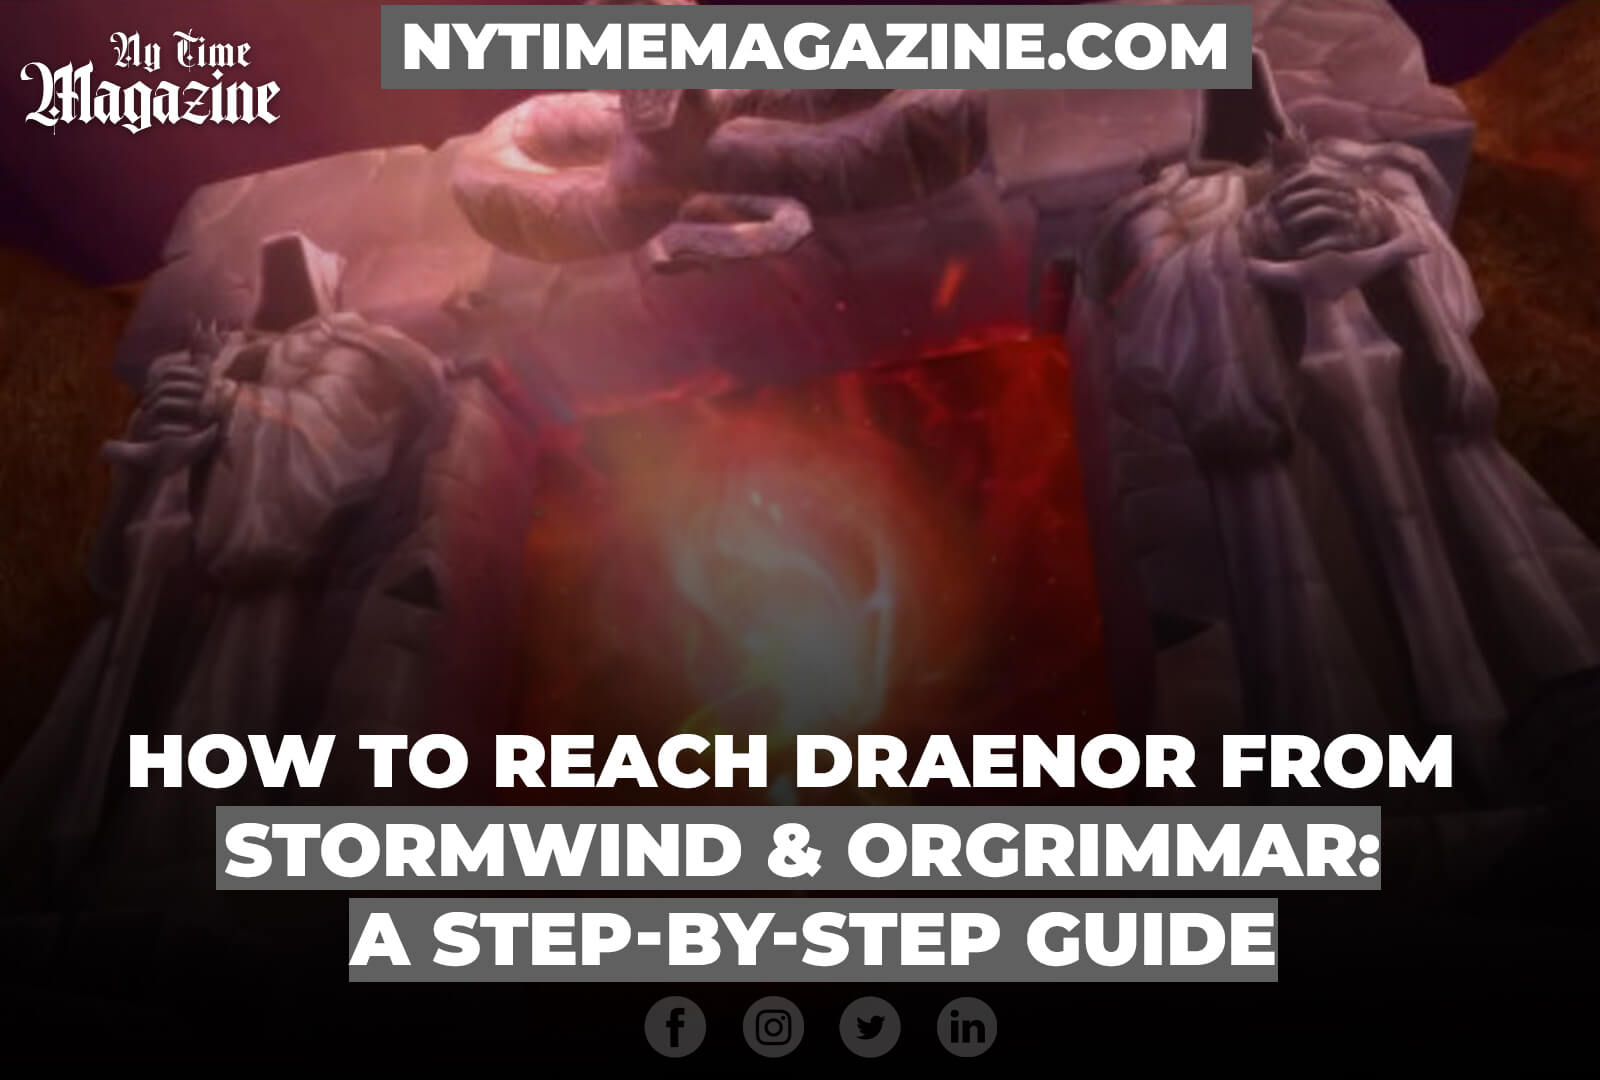 HOW TO REACH DRAENOR FROM STORMWIND AND ORGRIMMAR: A STEP-BY-STEP GUIDE